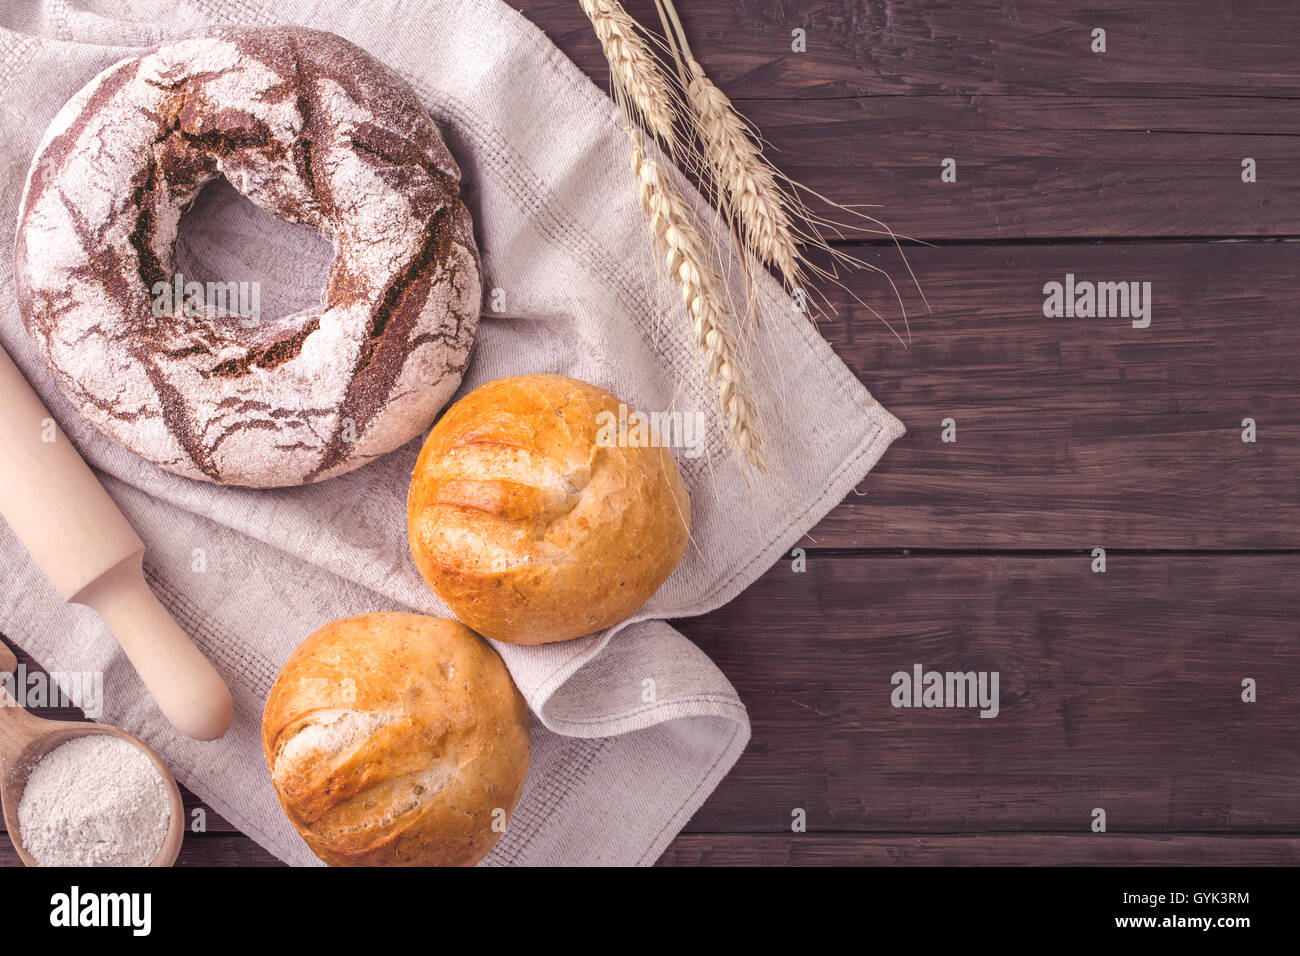 Rye bread and buns on table rustic style Stock Photo